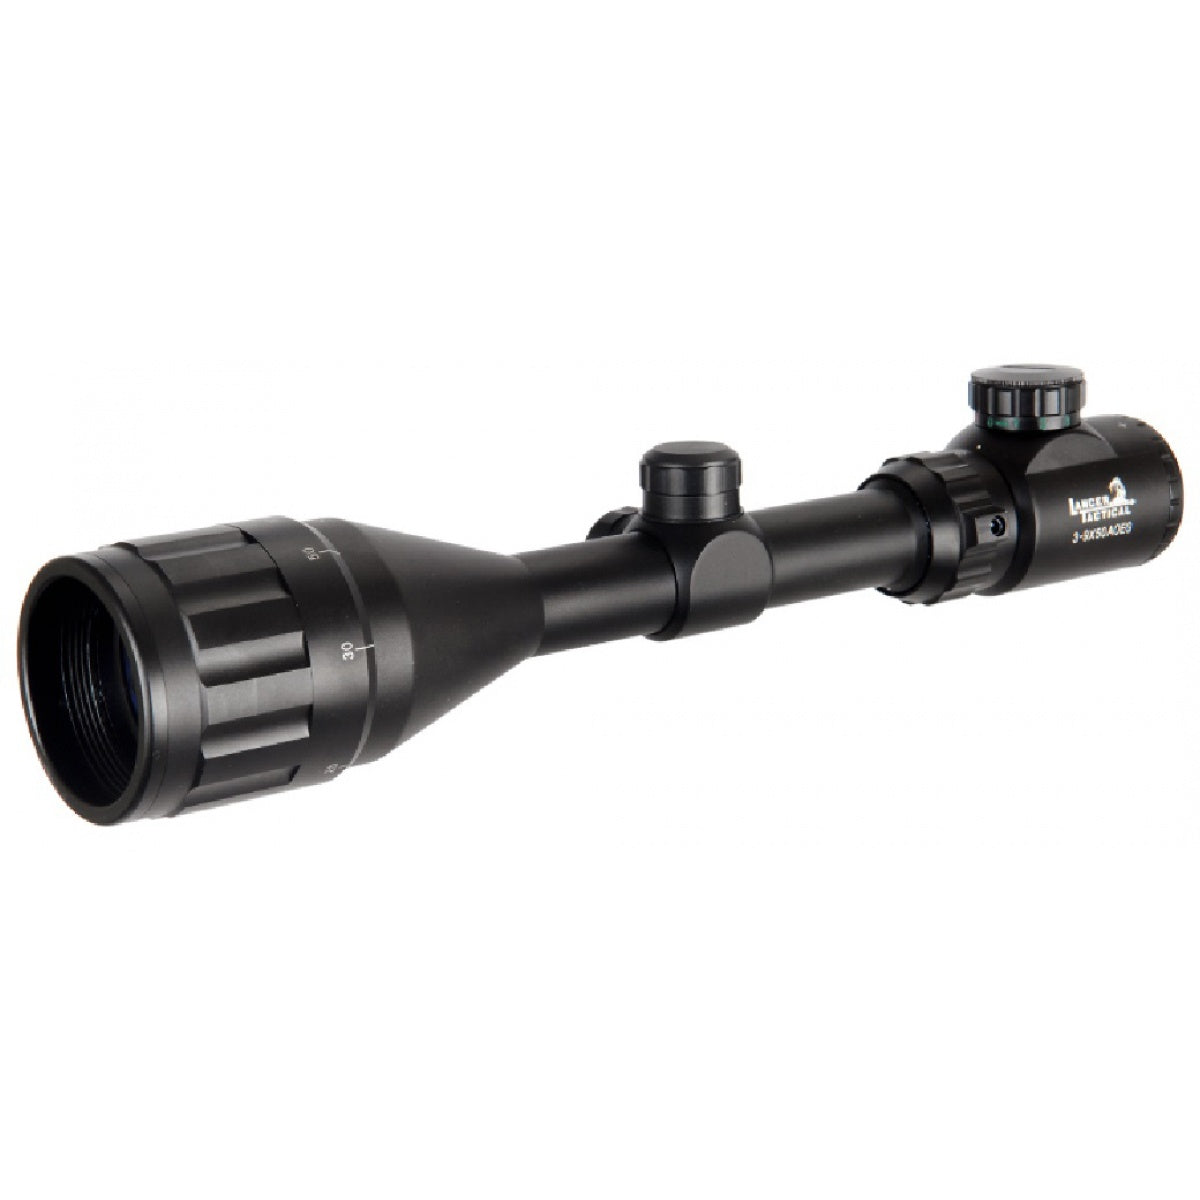 Lancer Tactical 3-9x50 Red & Green Dual Illuminated AO Scope - ssairsoft.com